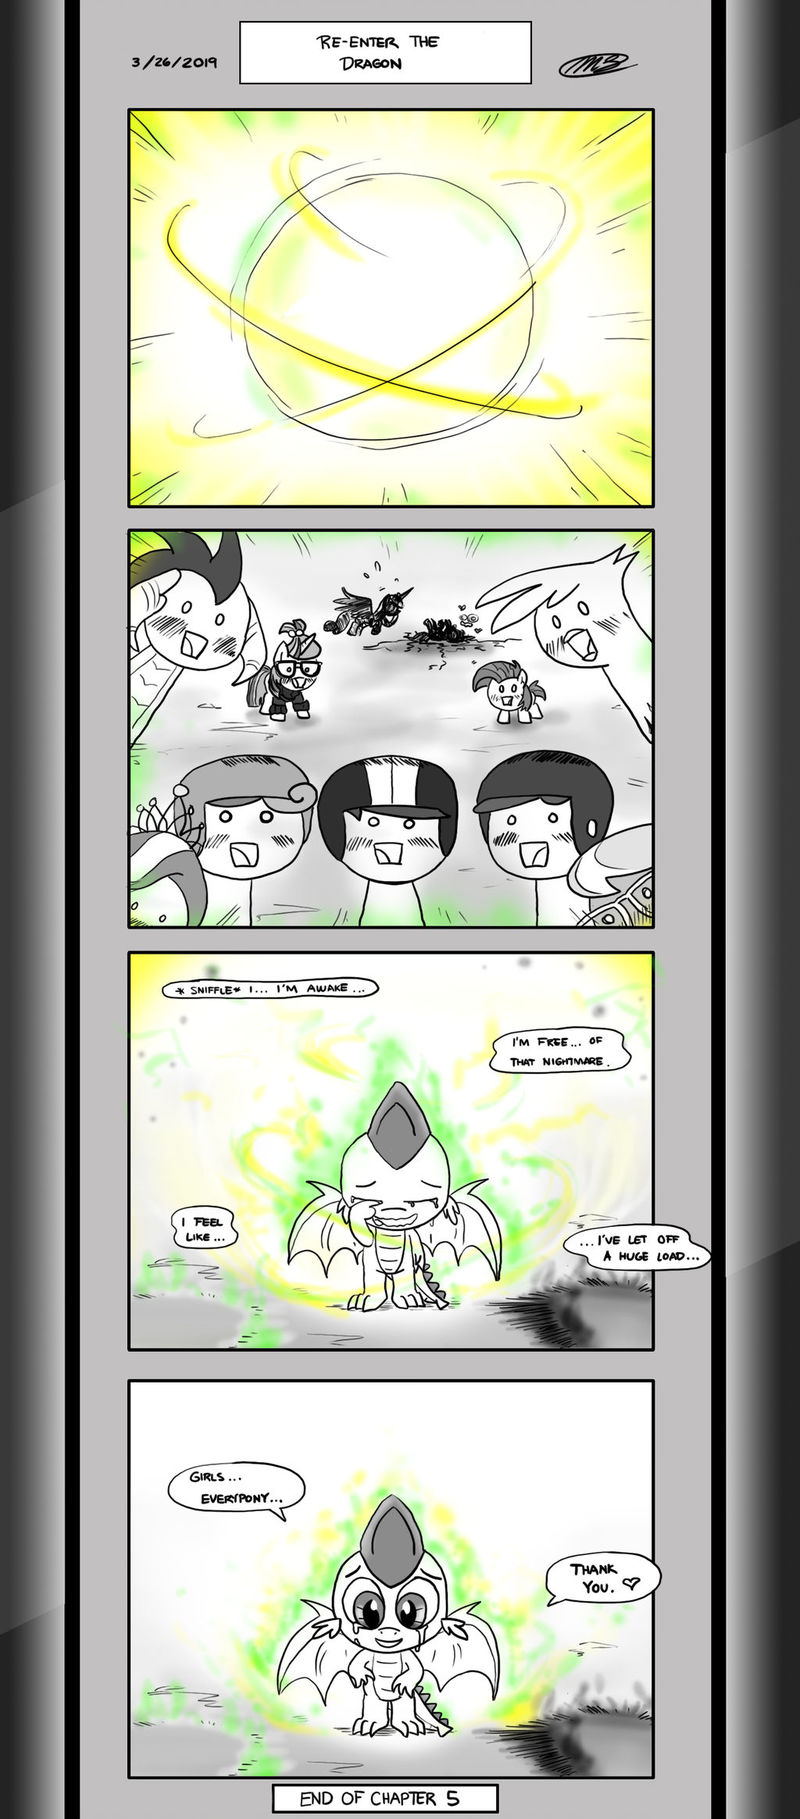 Page 11: Dragon's Re-entry